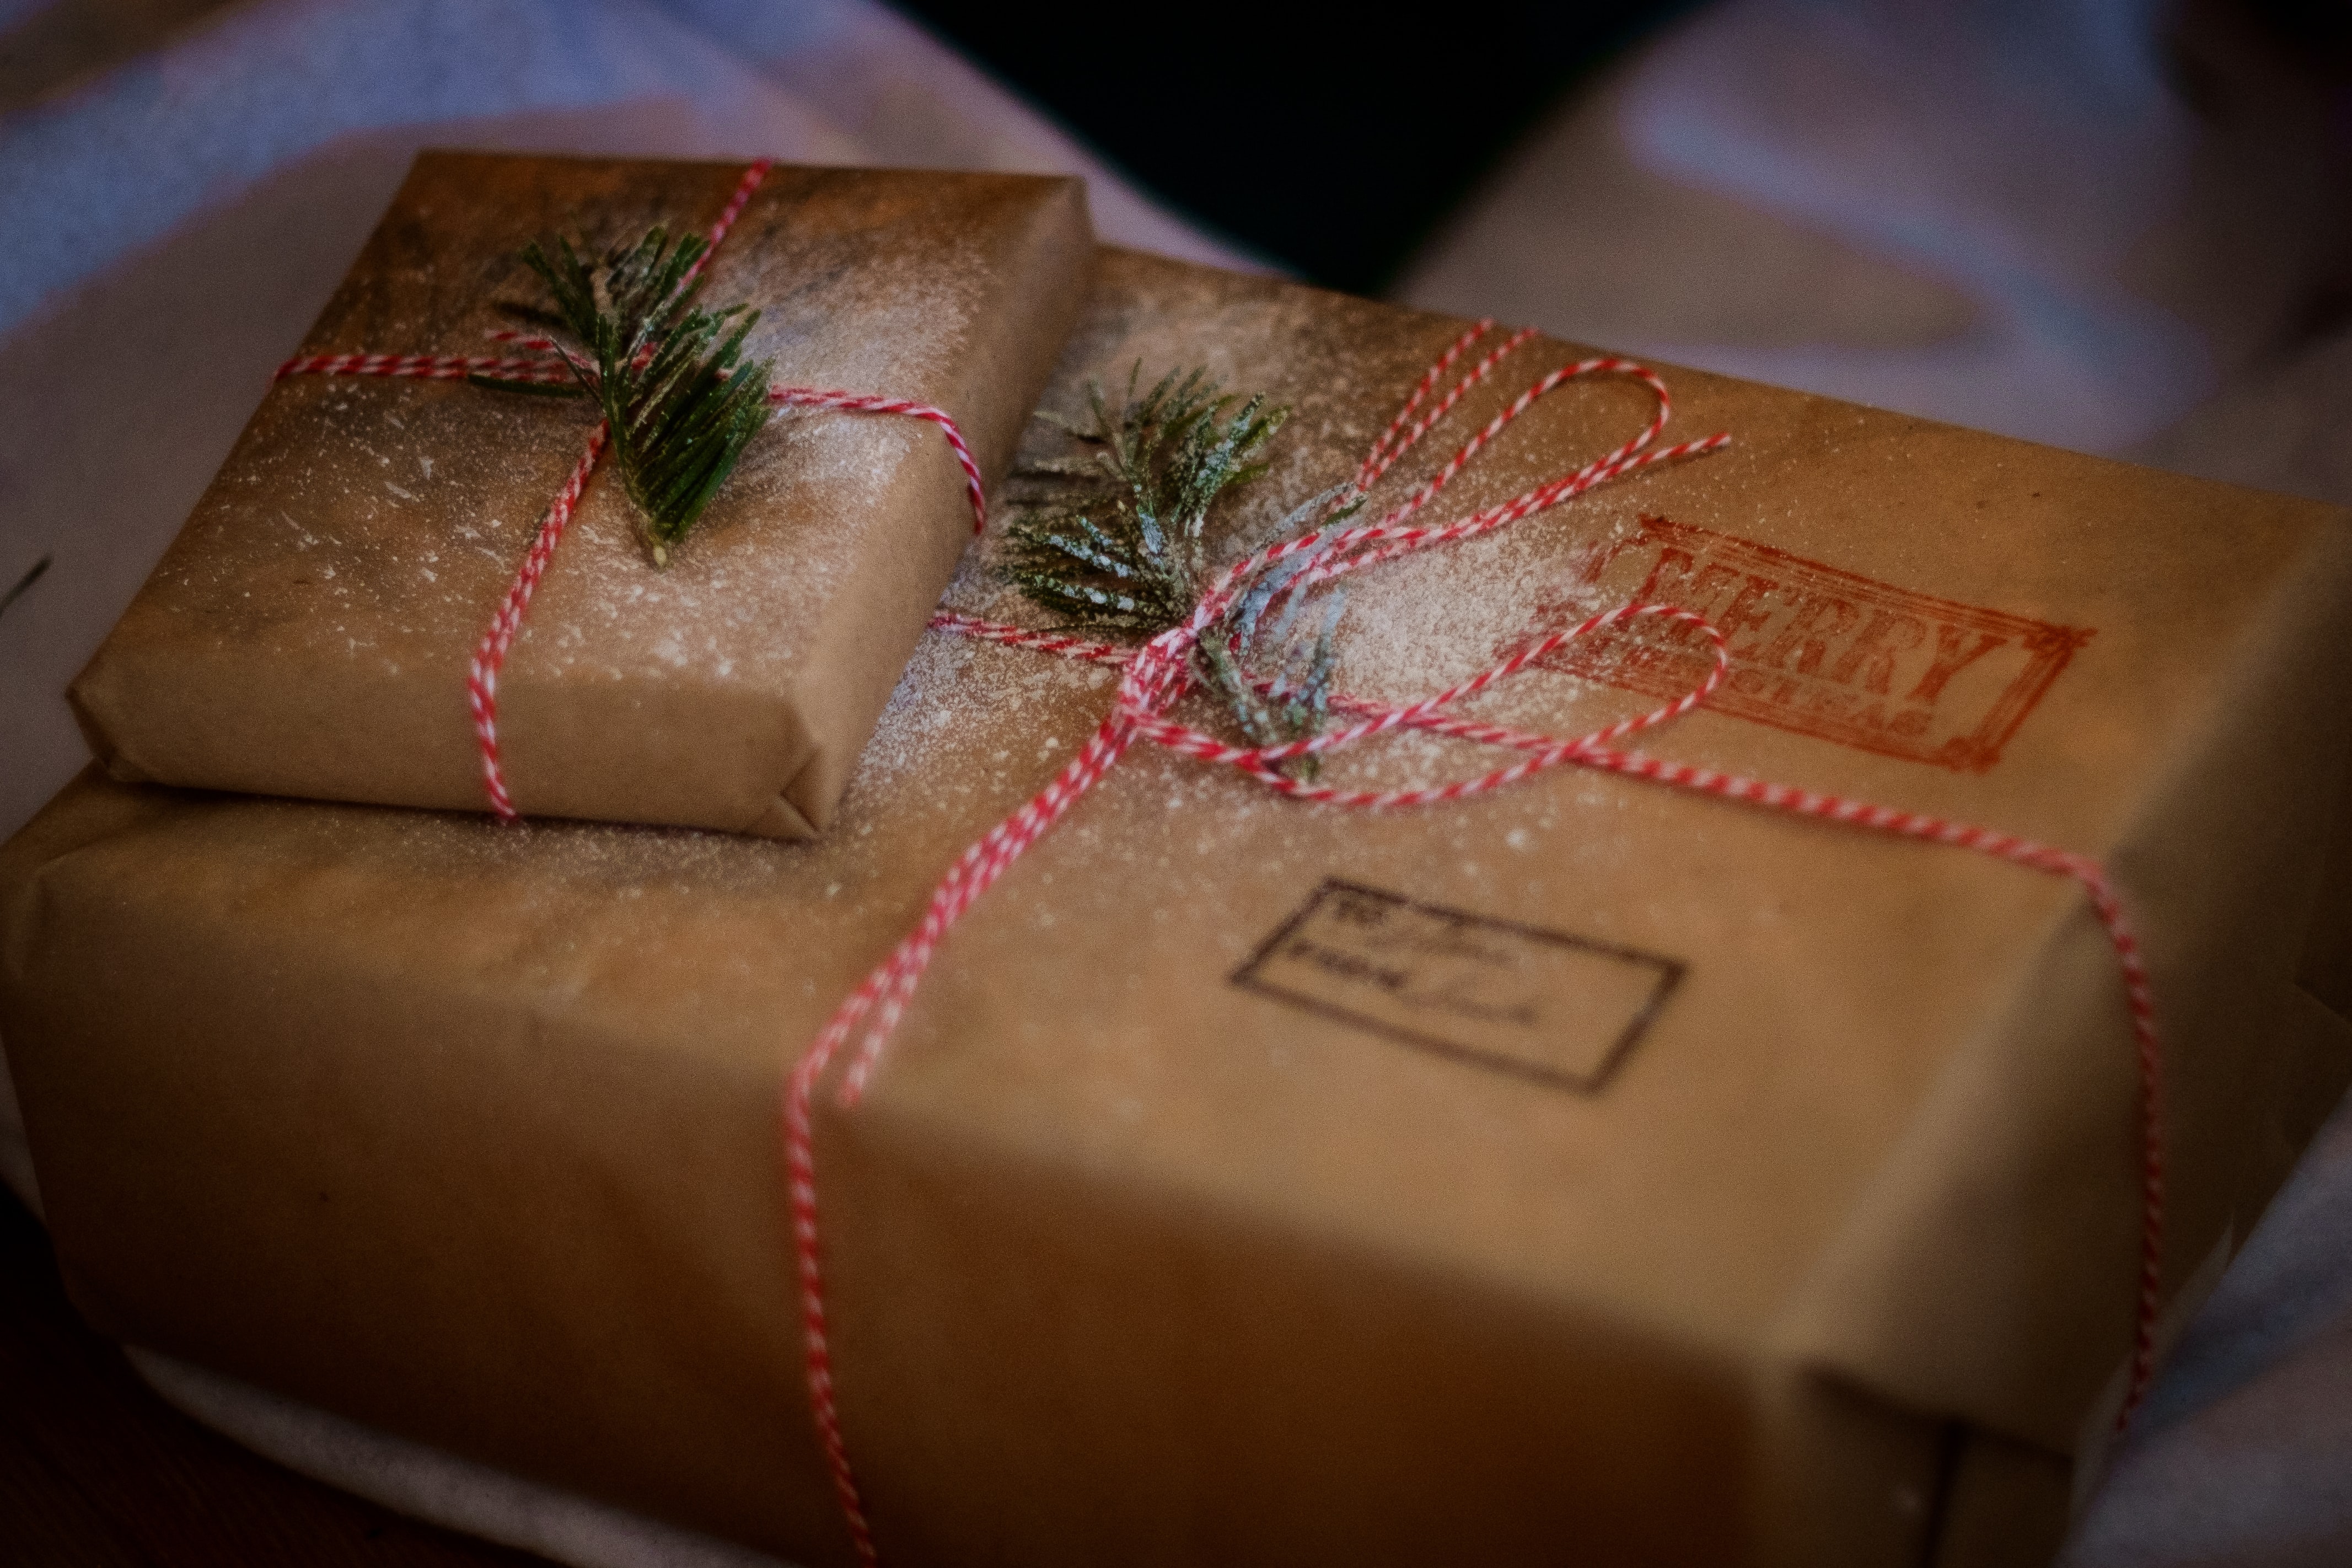 GIftboxes | Two brown parcels with red ties and green pine sprigs are stacked at a snowy doorstep